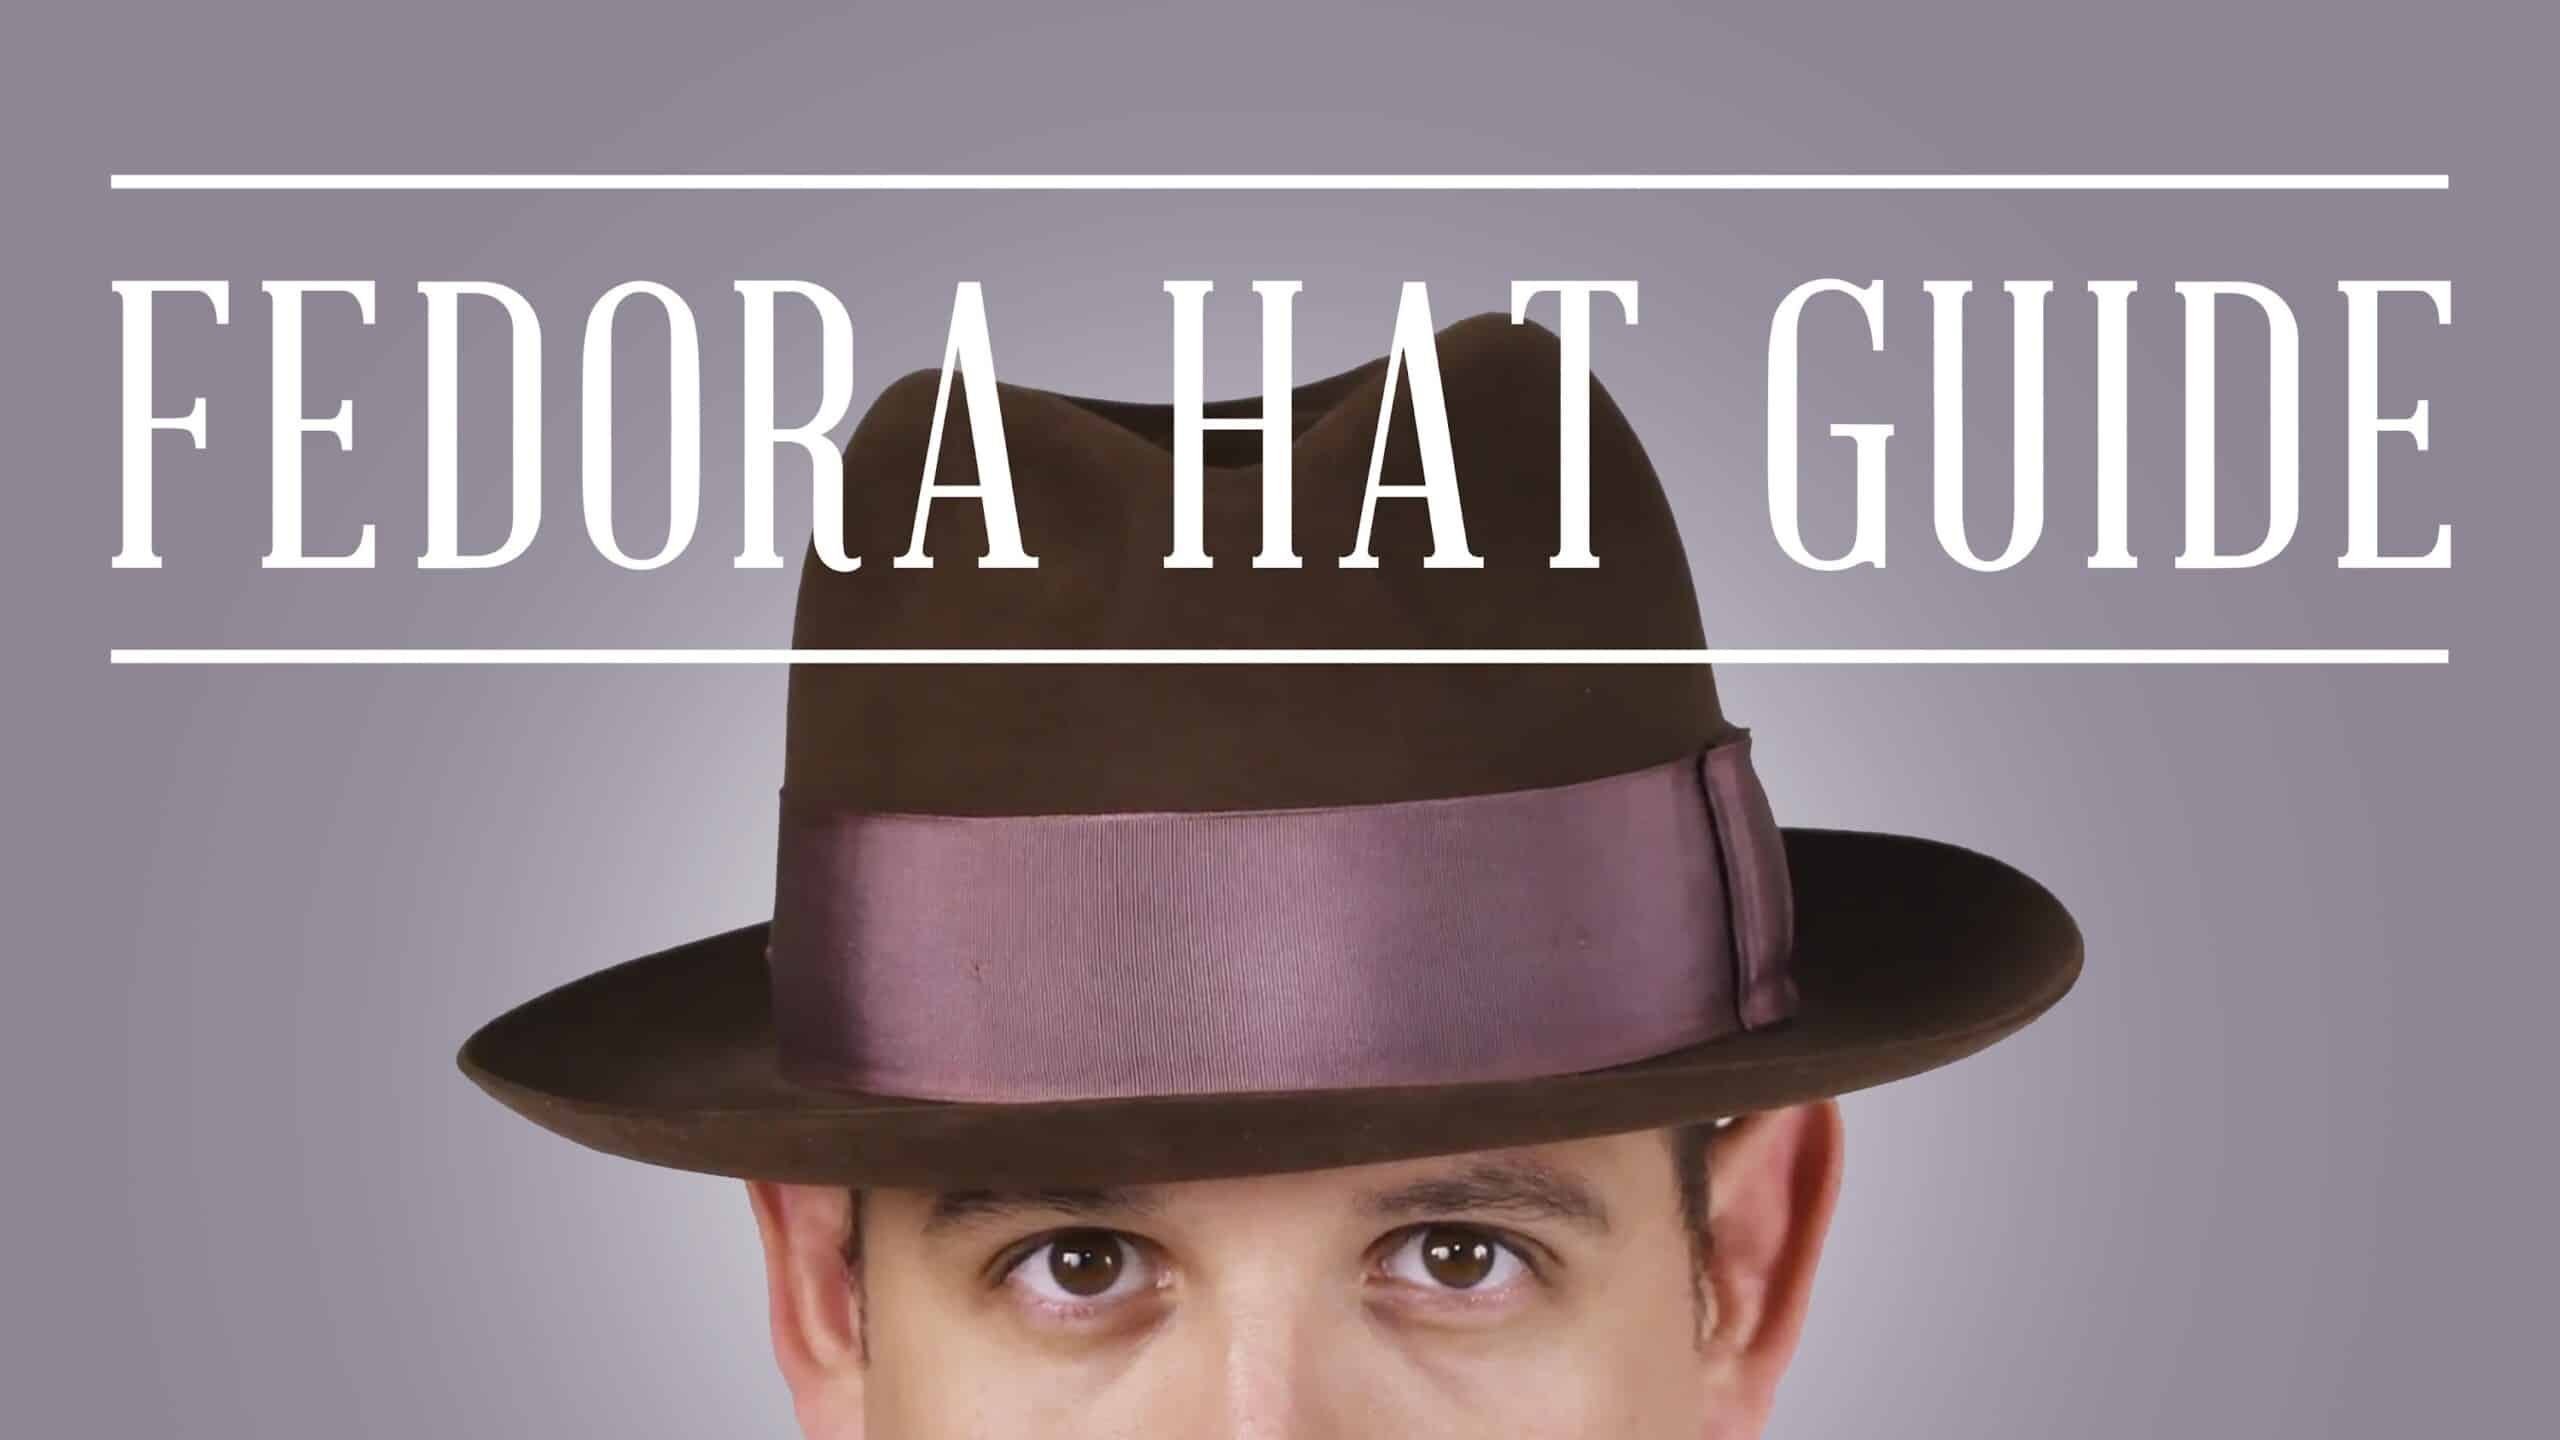 The Fedora Hat Guide